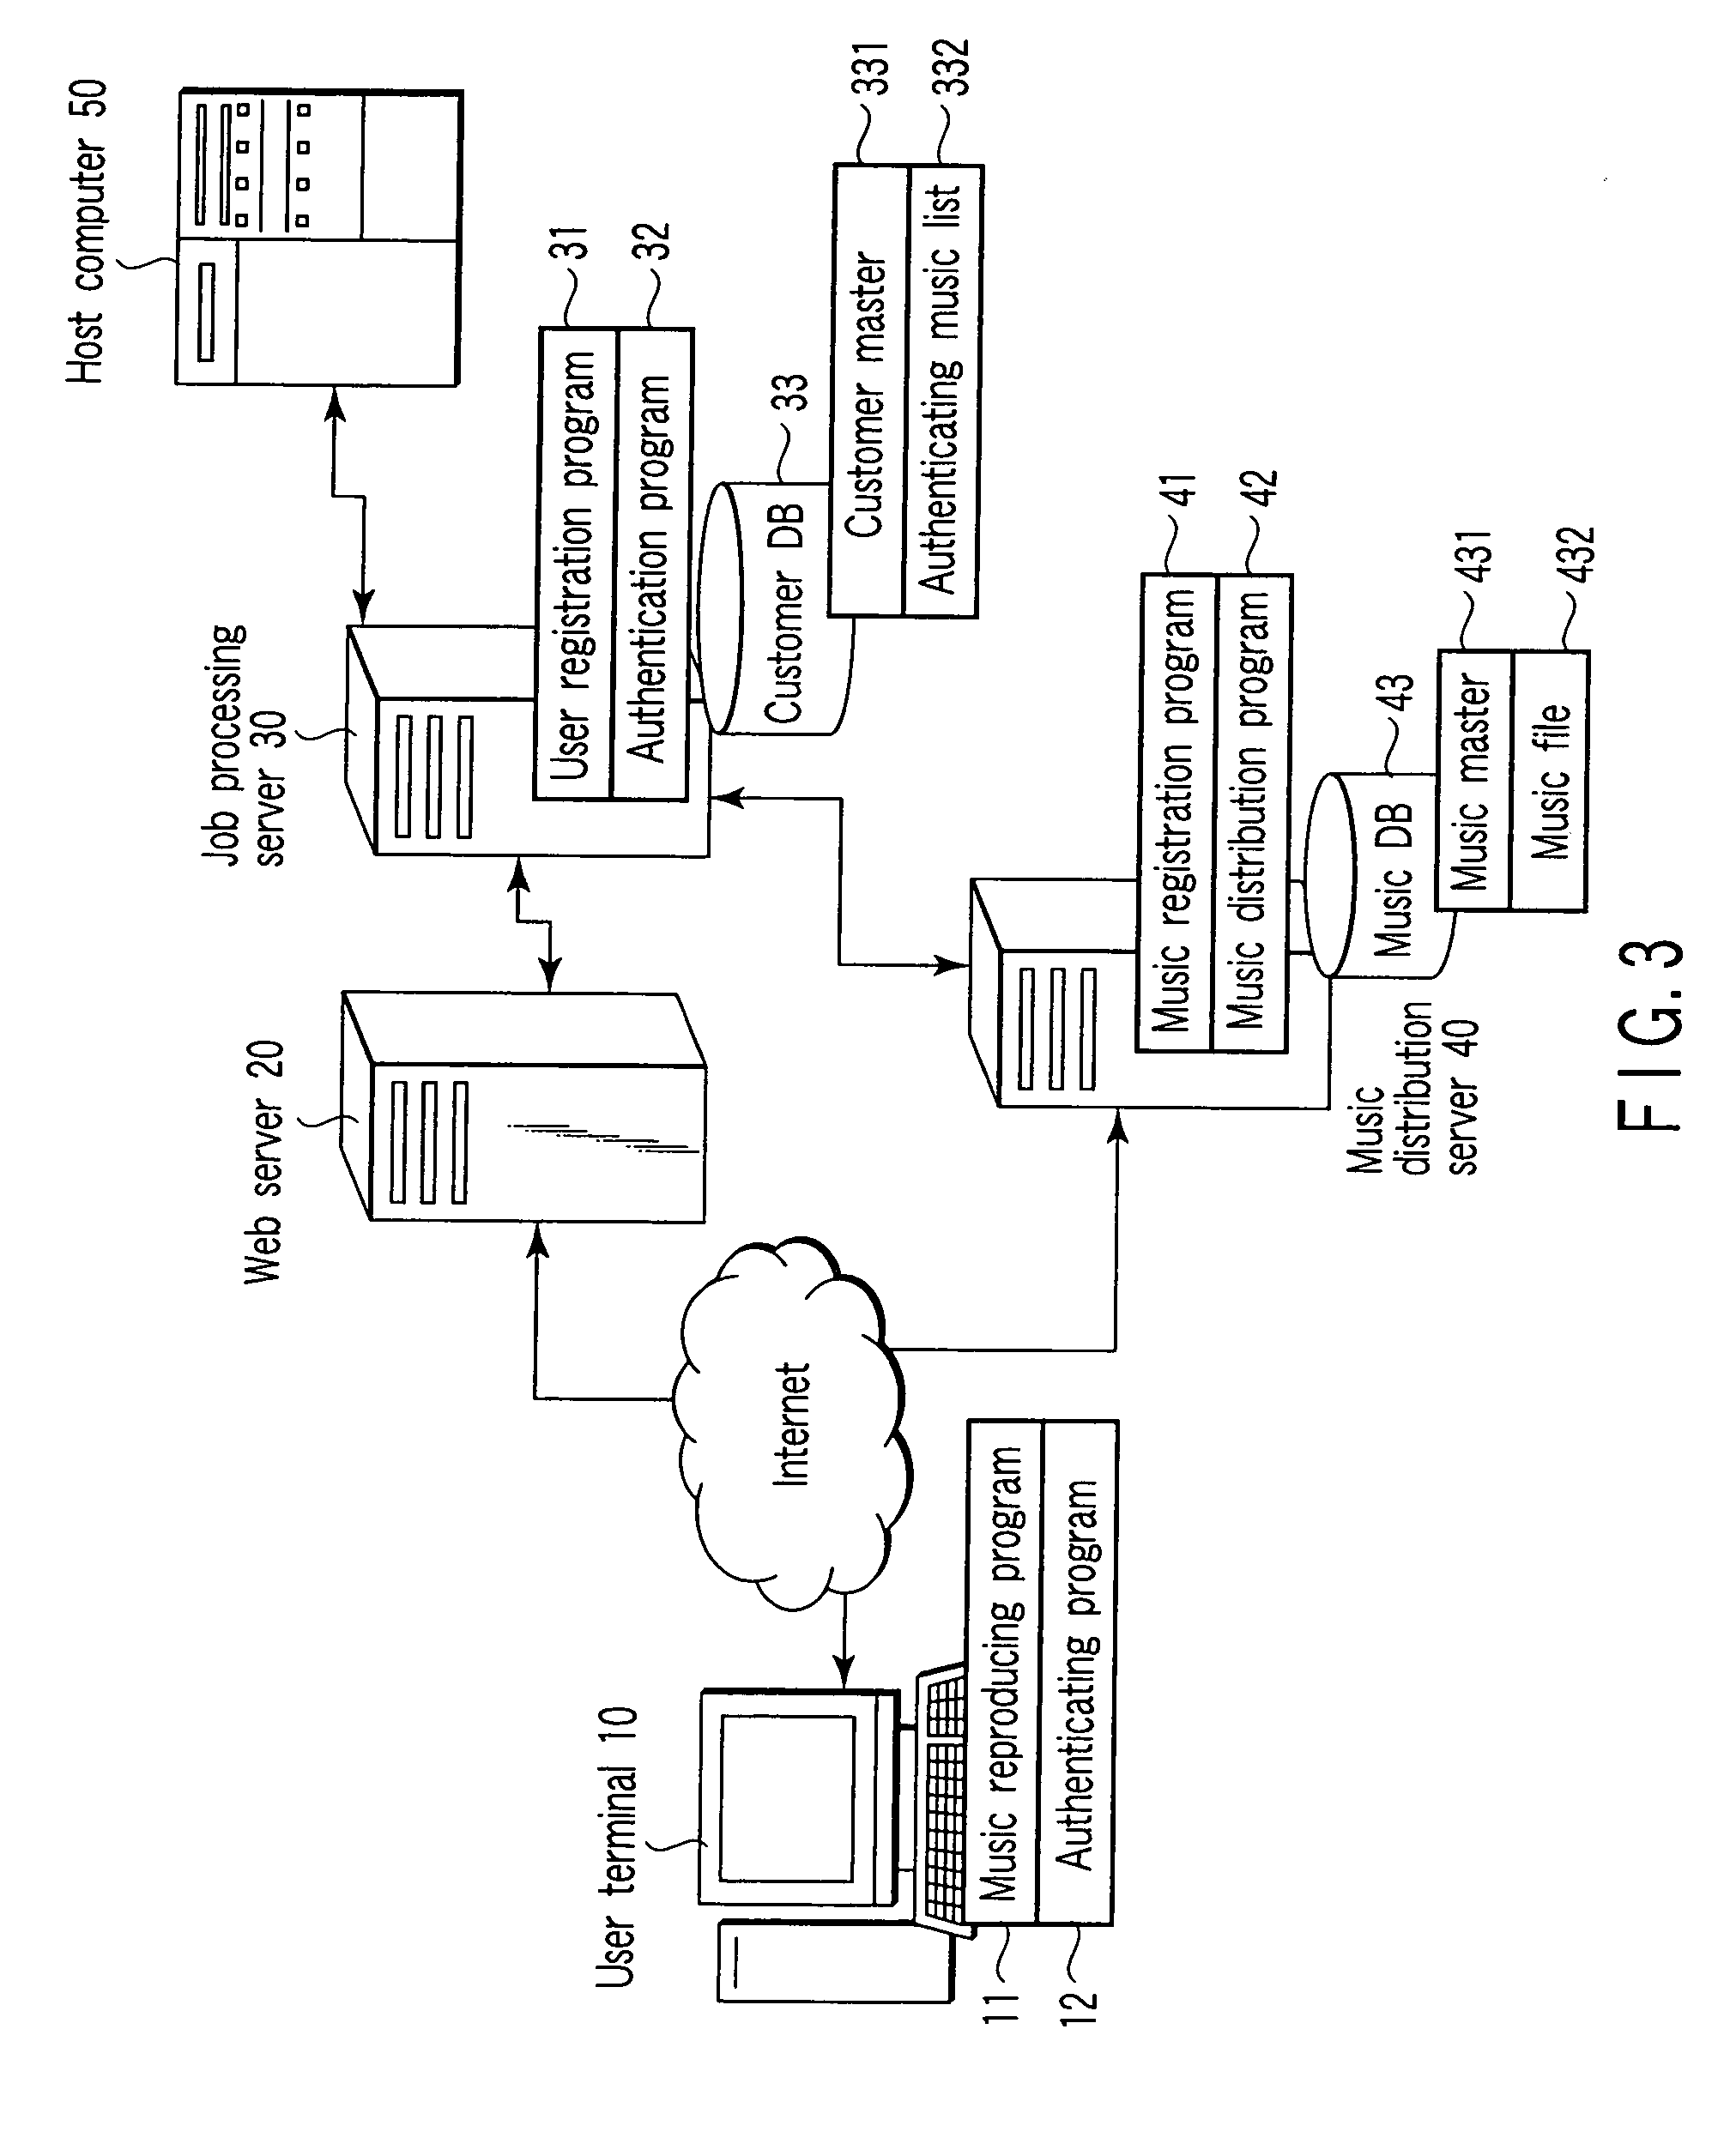 Person oneself authenticating system and person oneself authenticating method